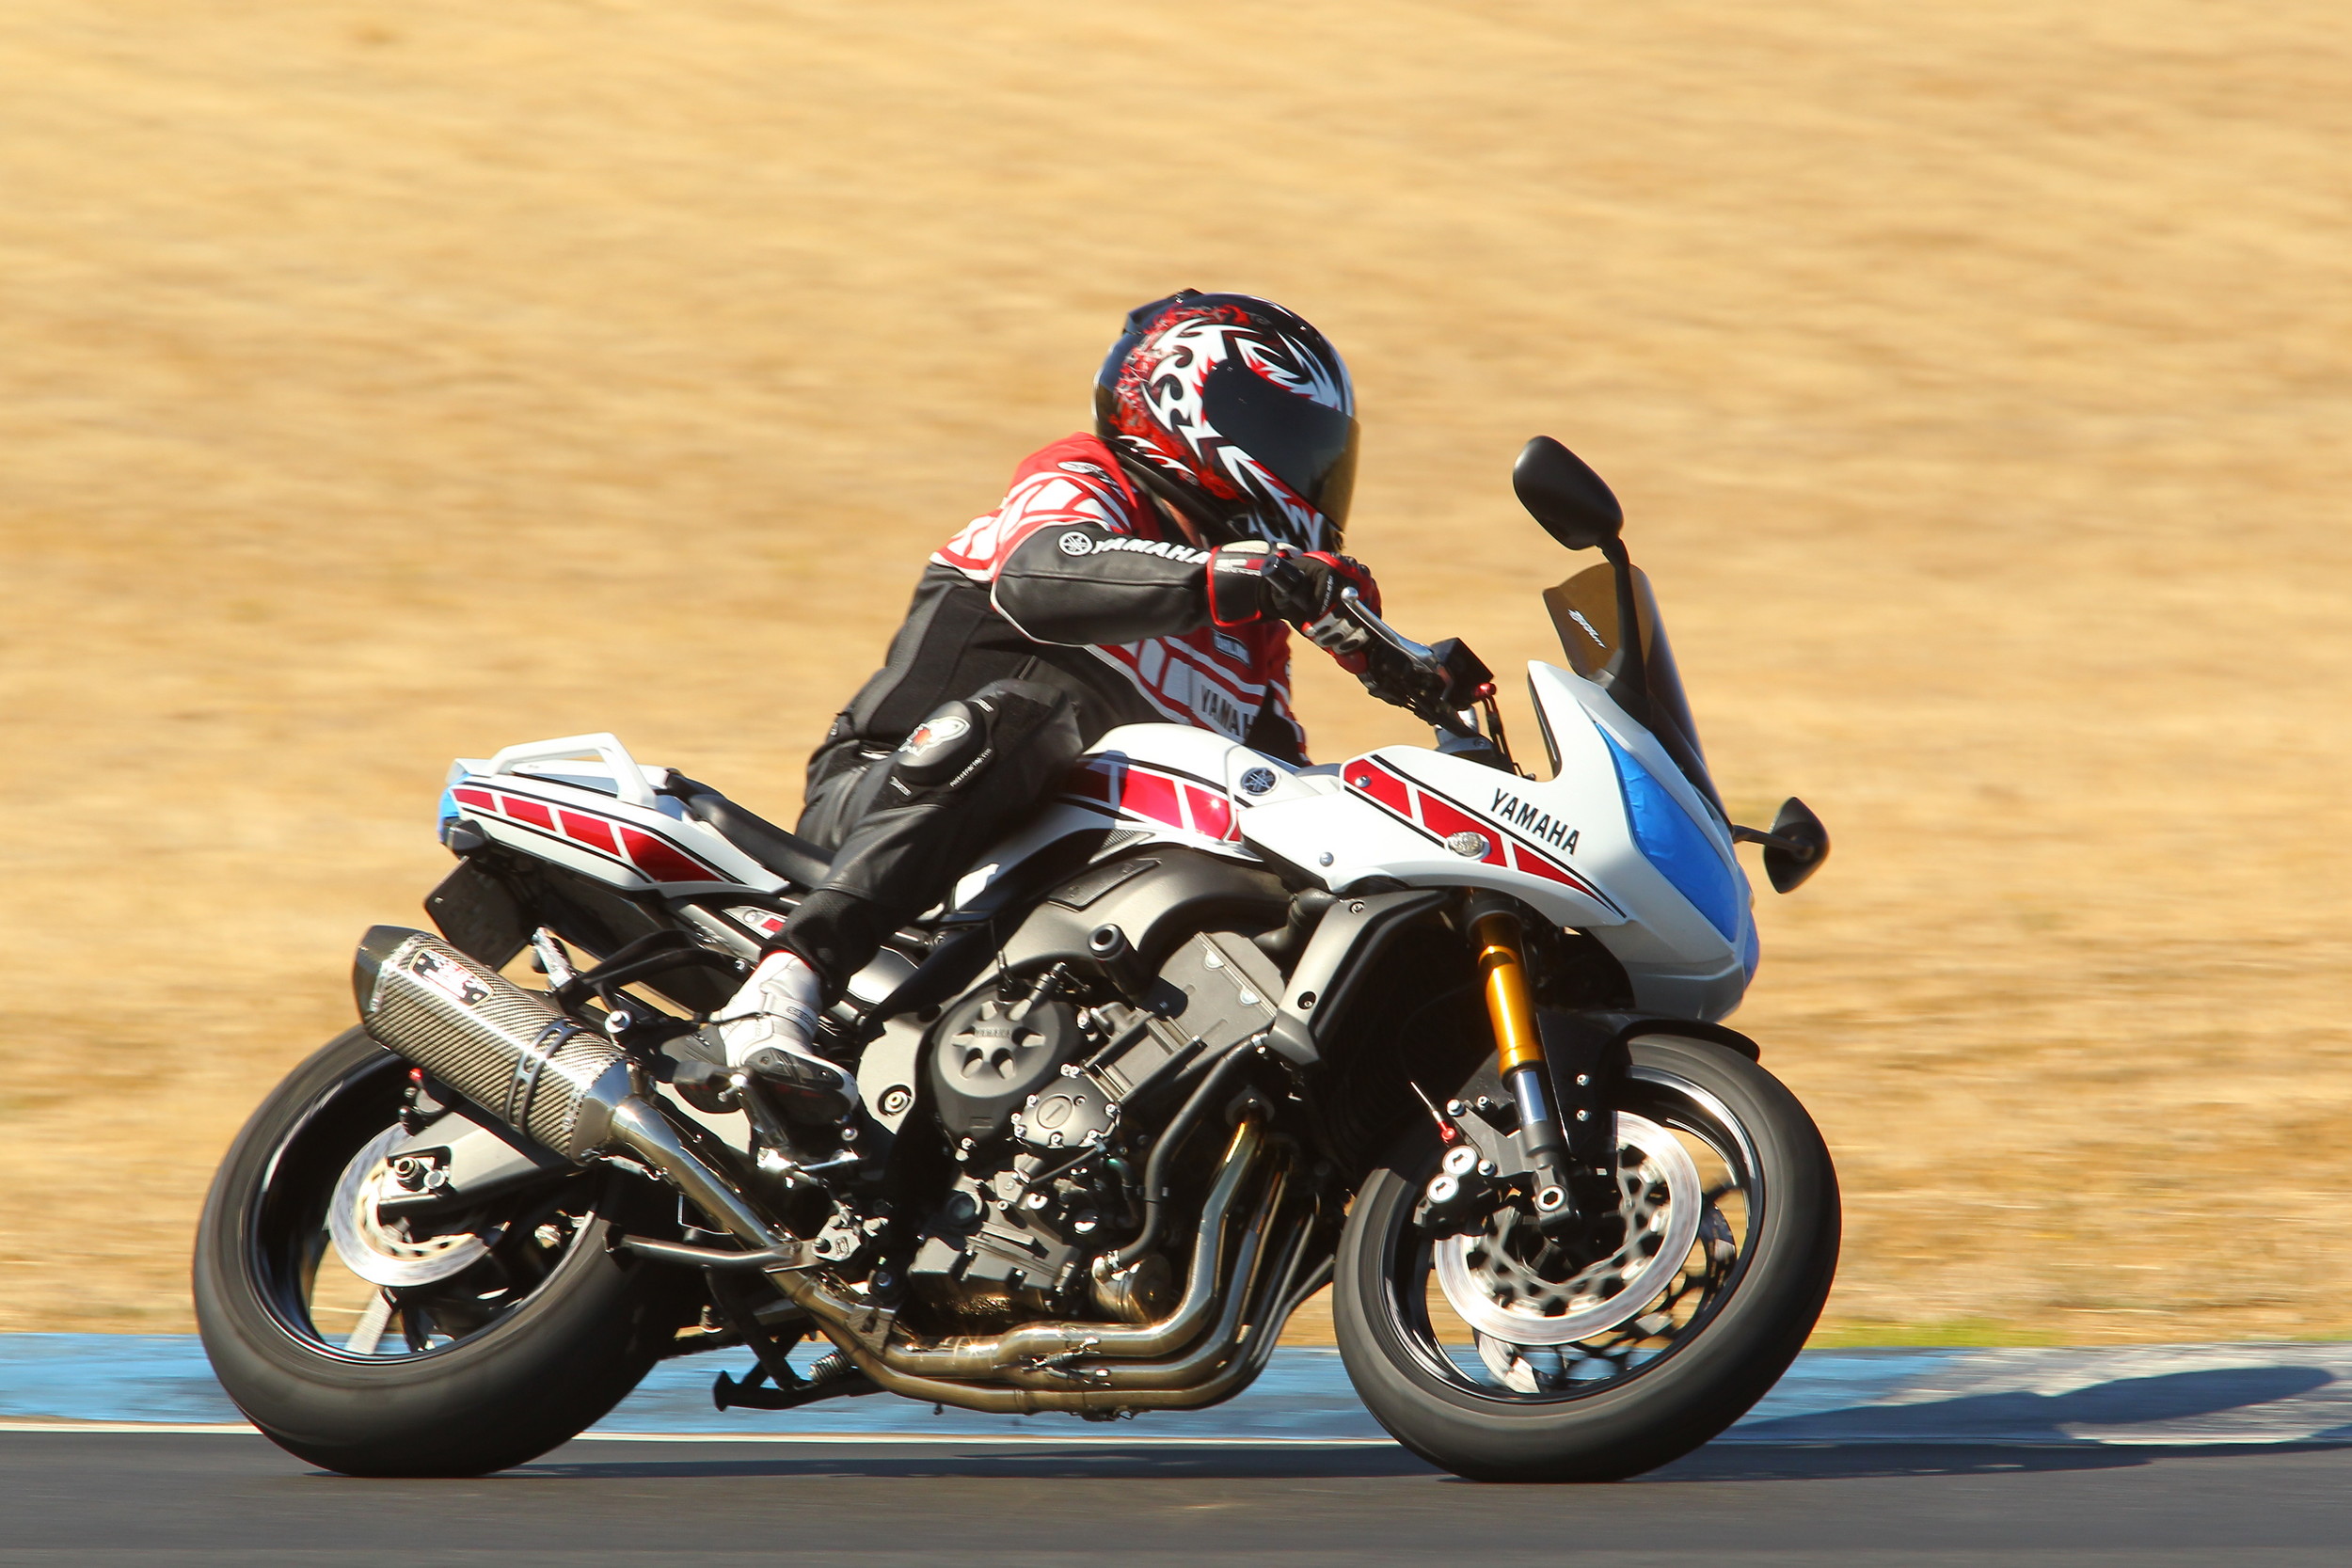 FZ1 at the track